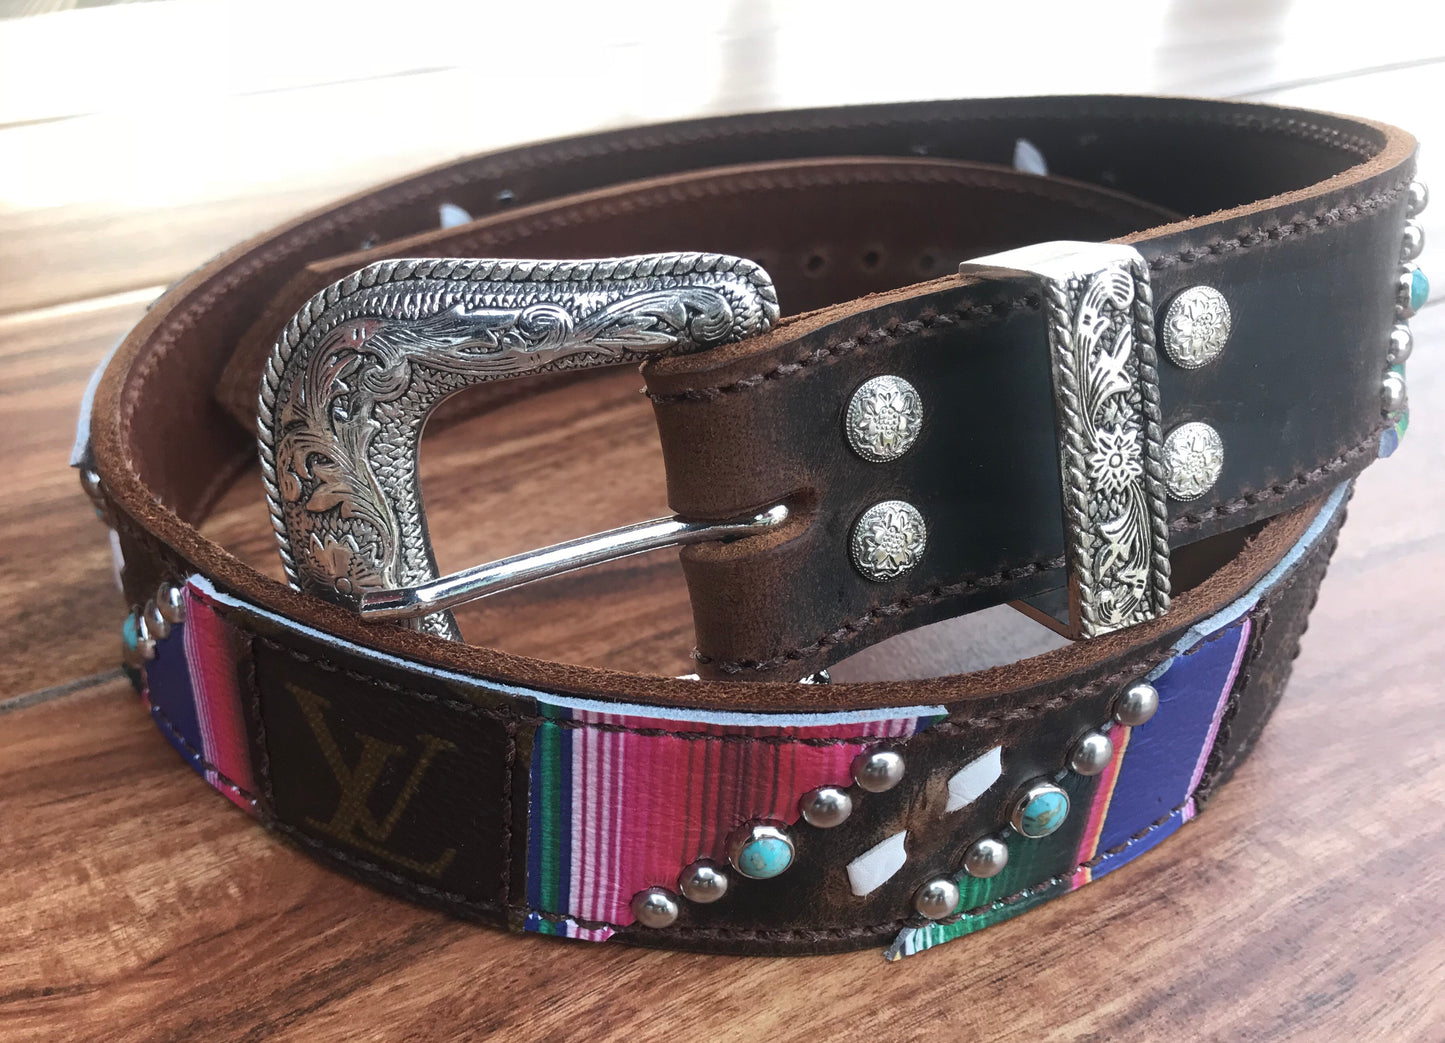 Serape leather with overlay